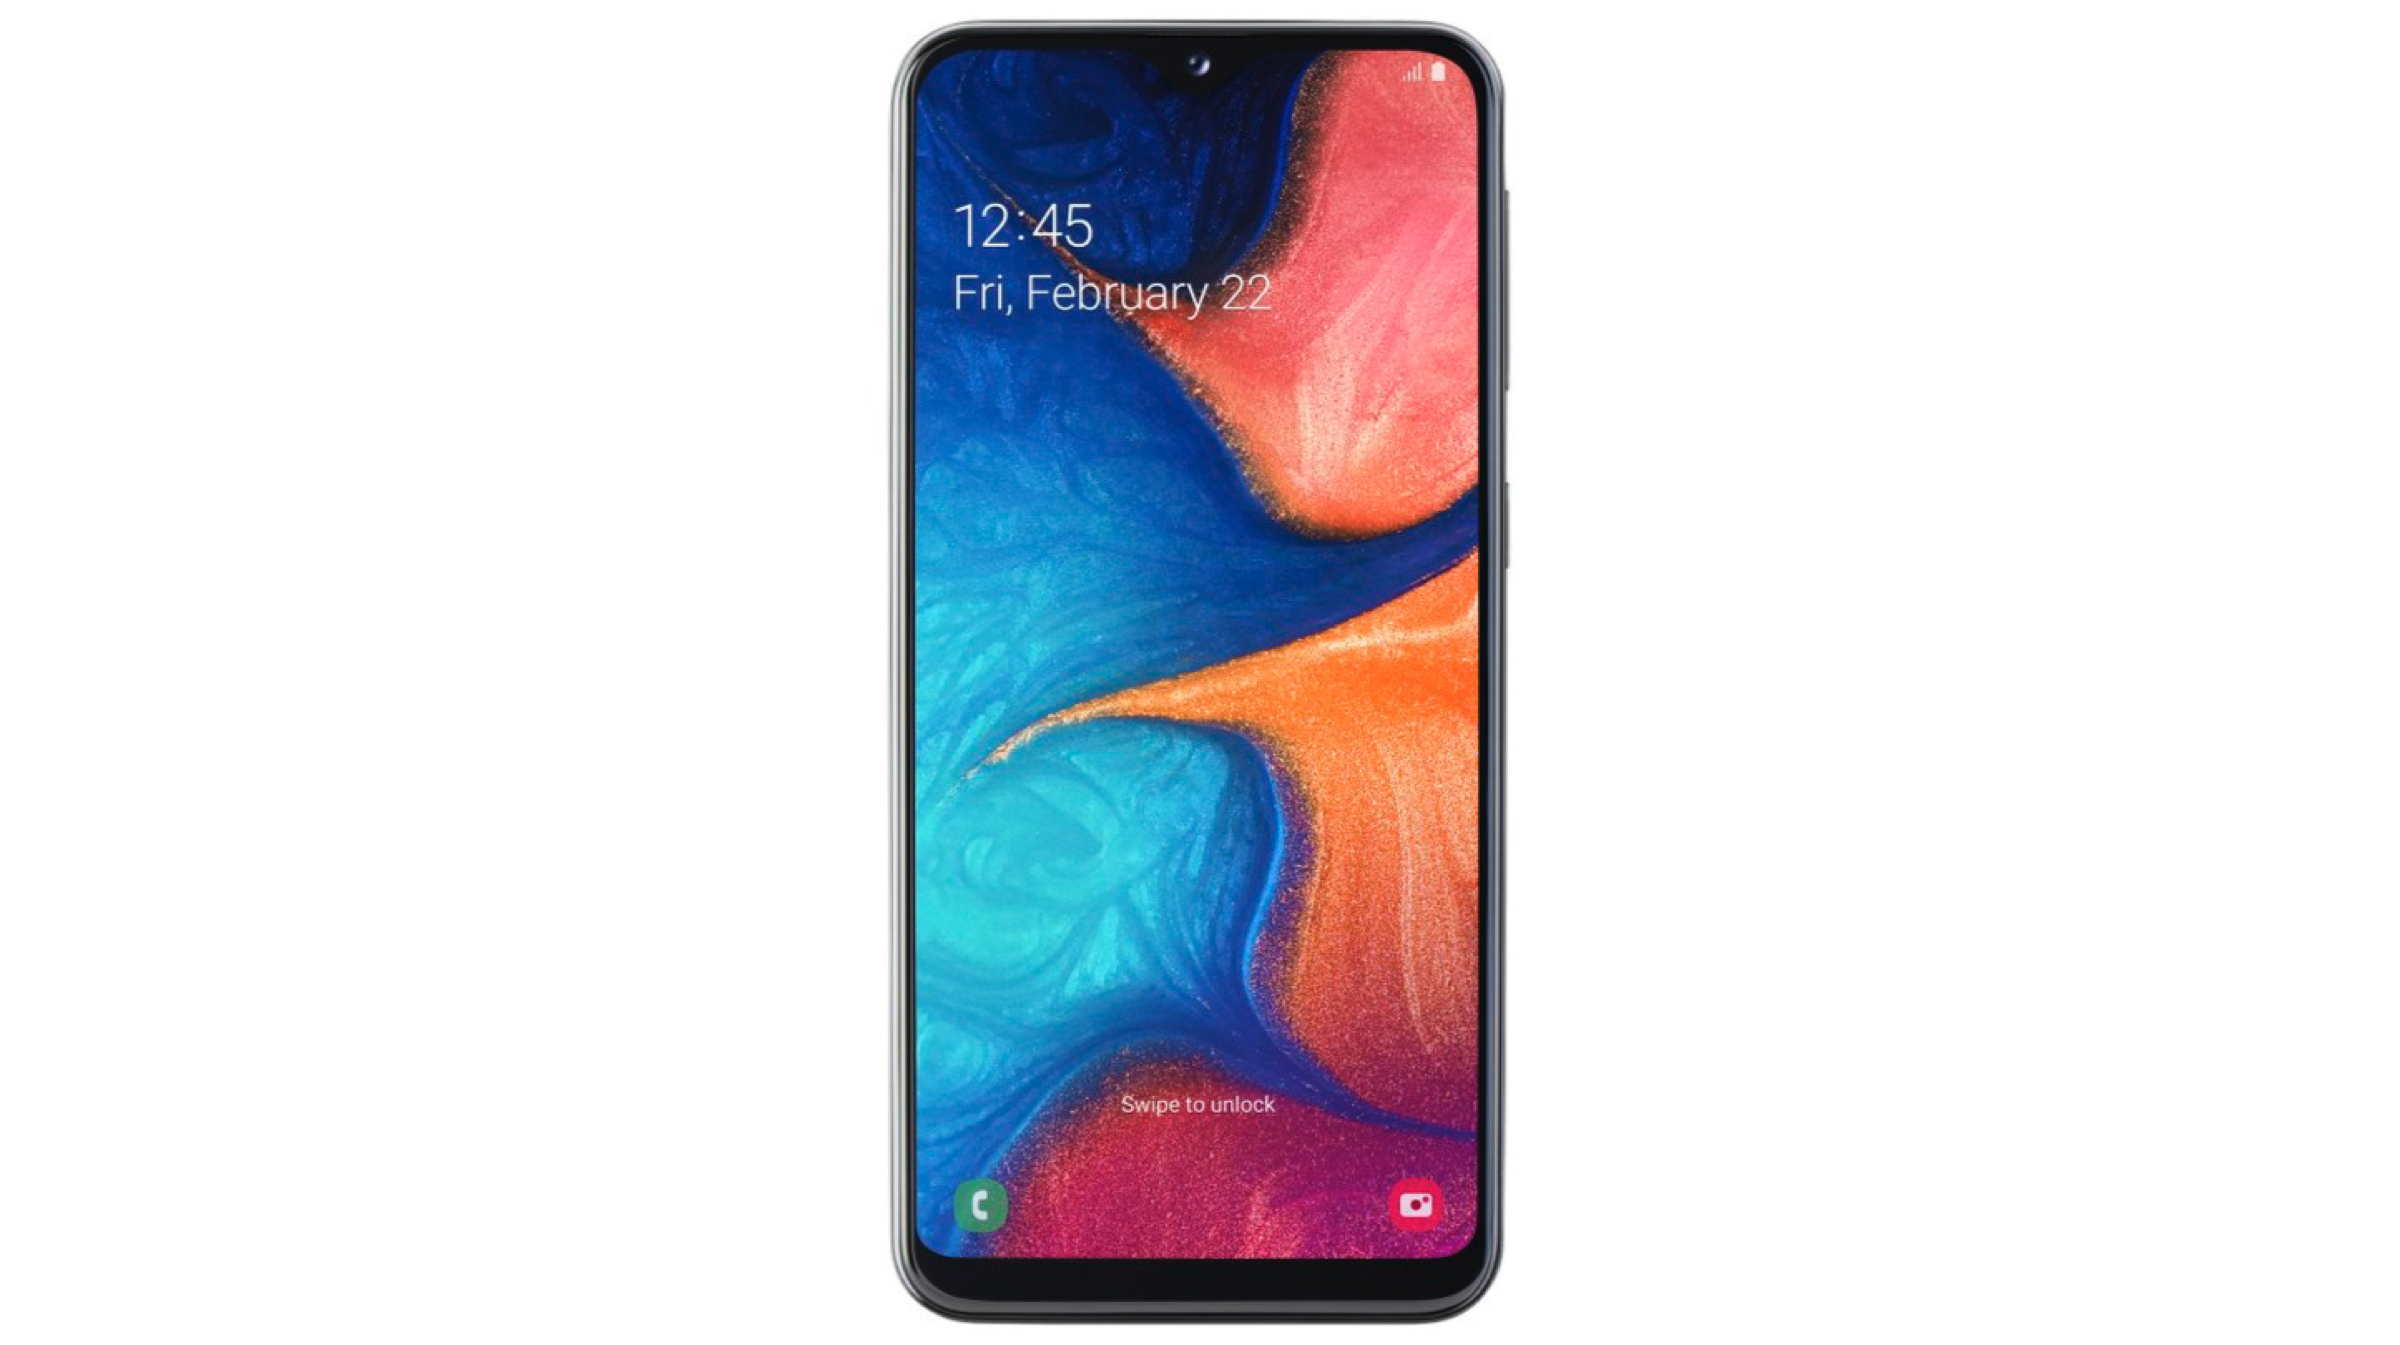 Samsung A20e launched – full specification and features here